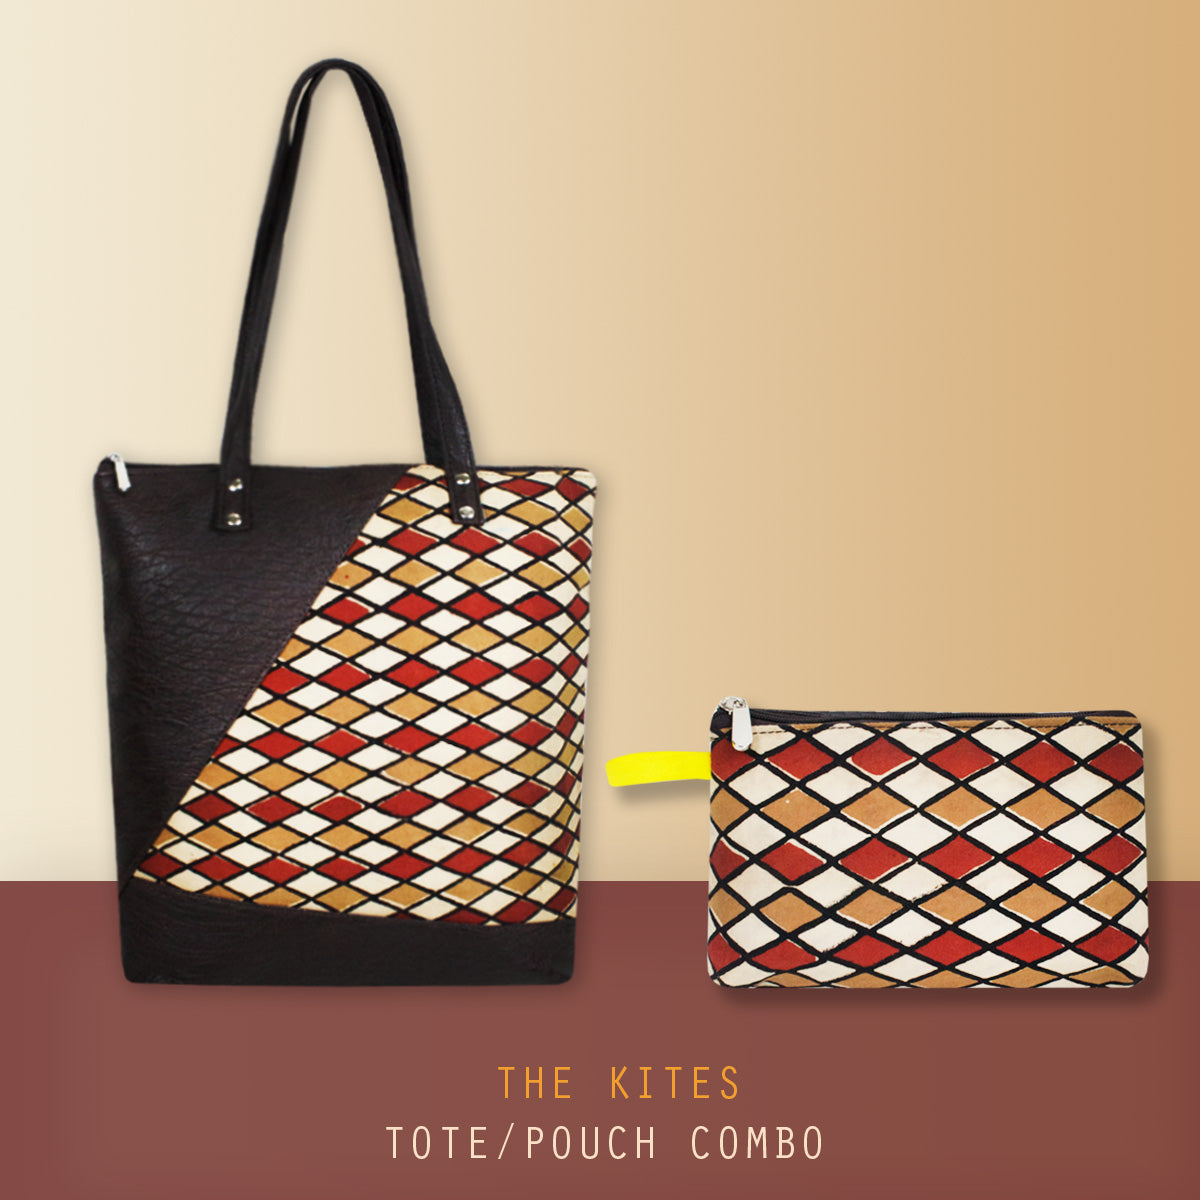 The Kites Tote/Pouch Combo